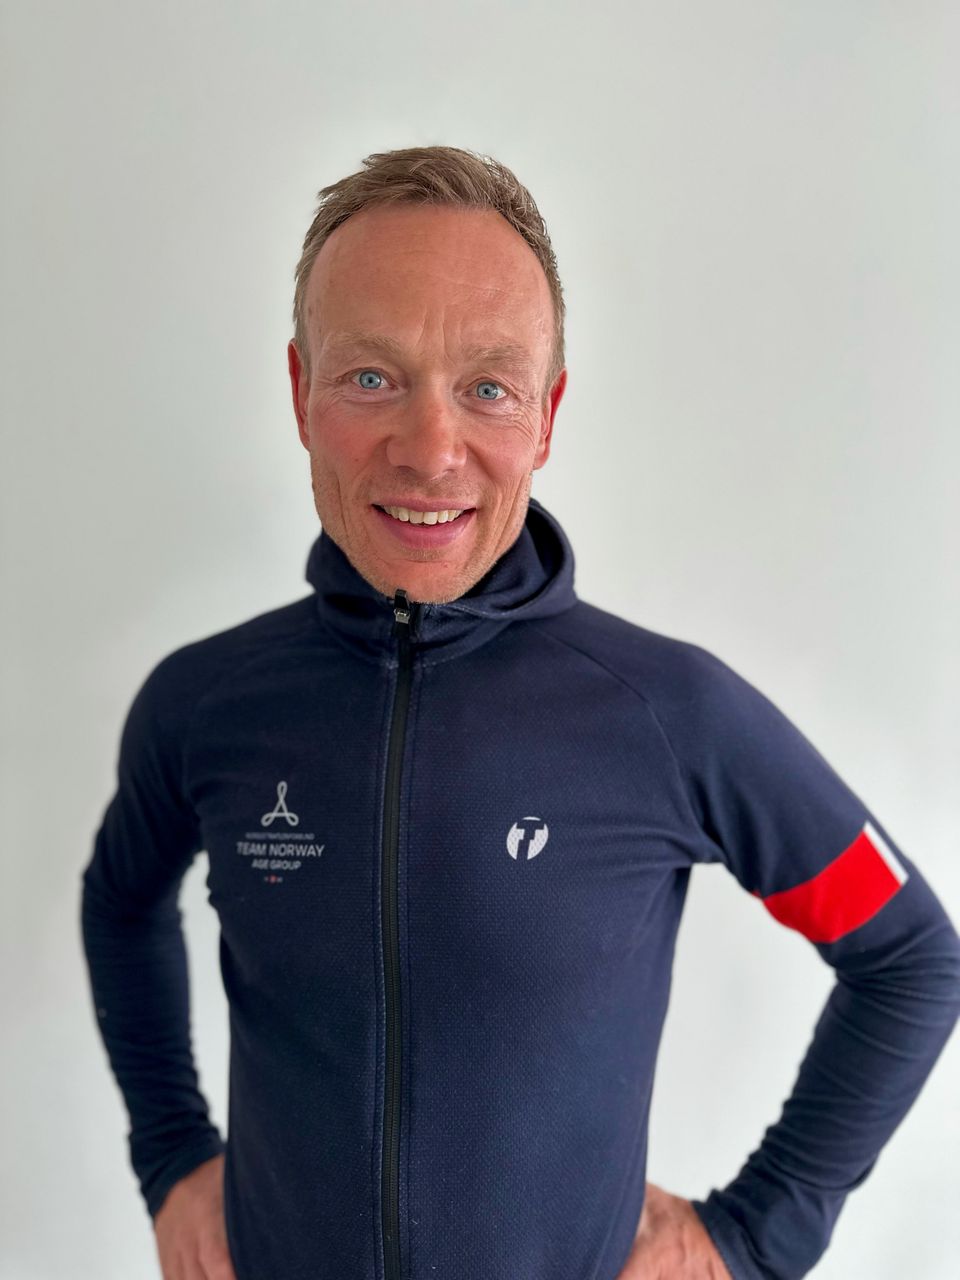 The Norwegian Triathlon Association has hired an assistant sports director